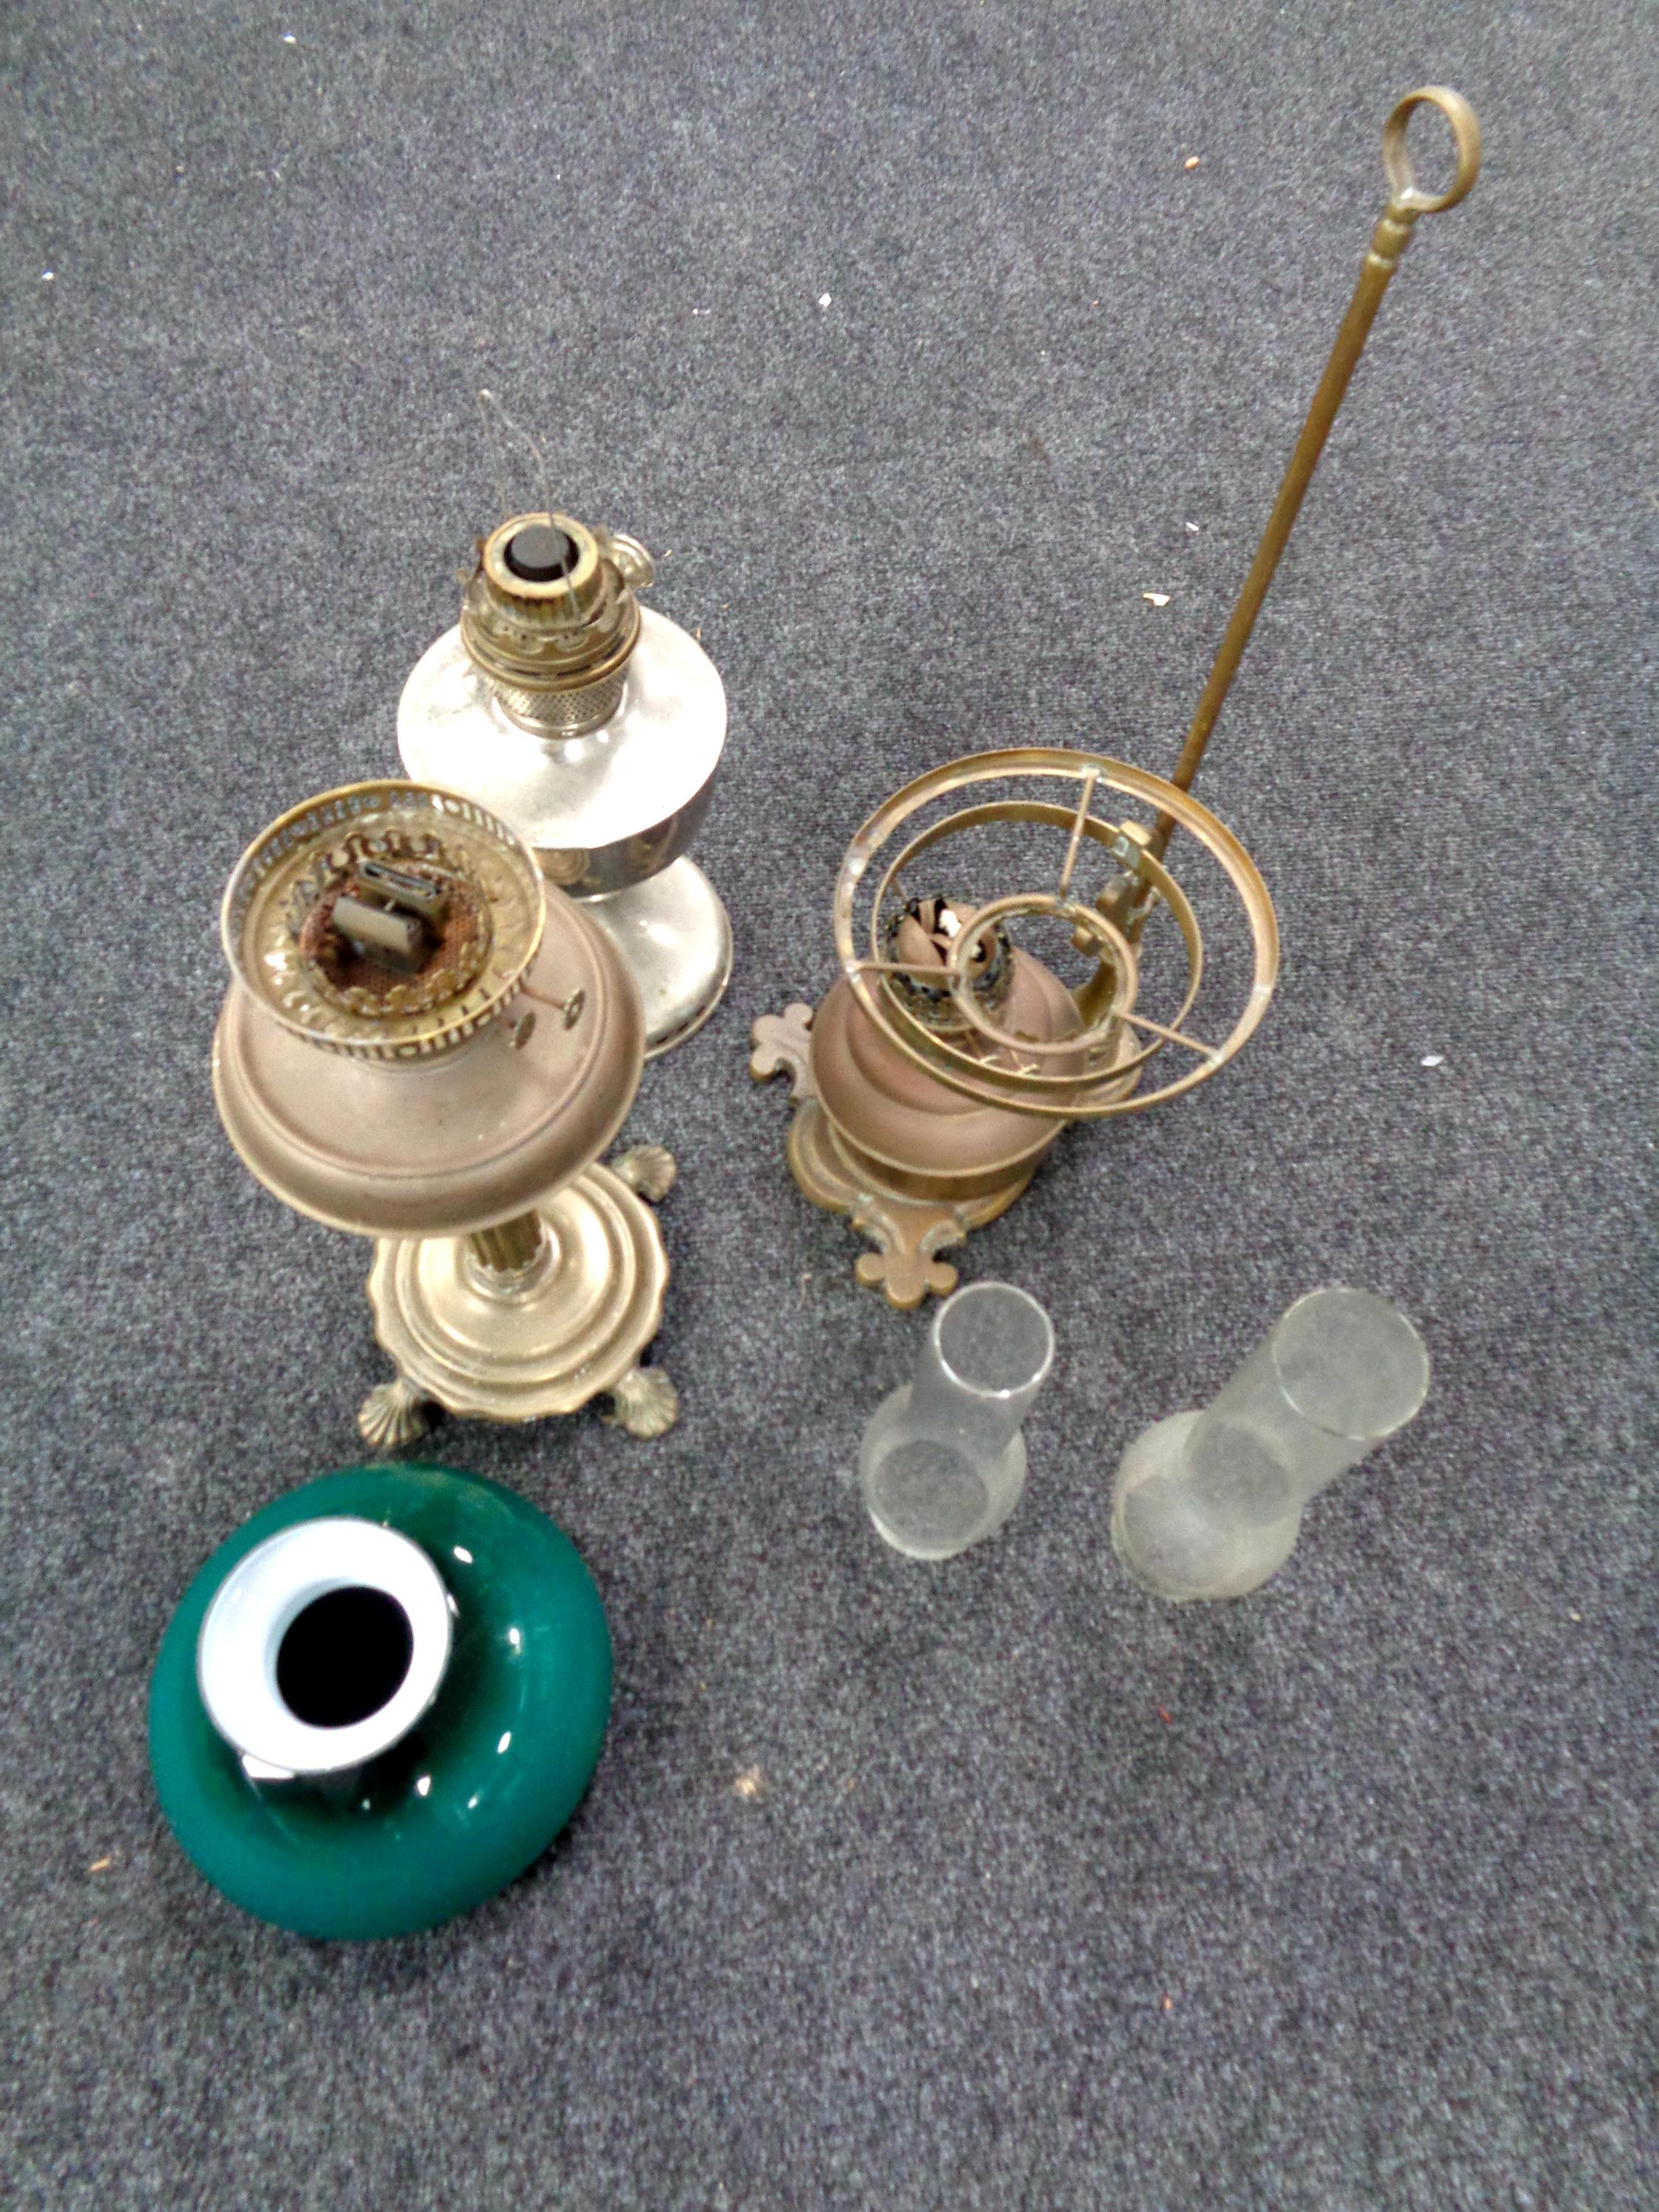 A tray containing three antique part oil lamps